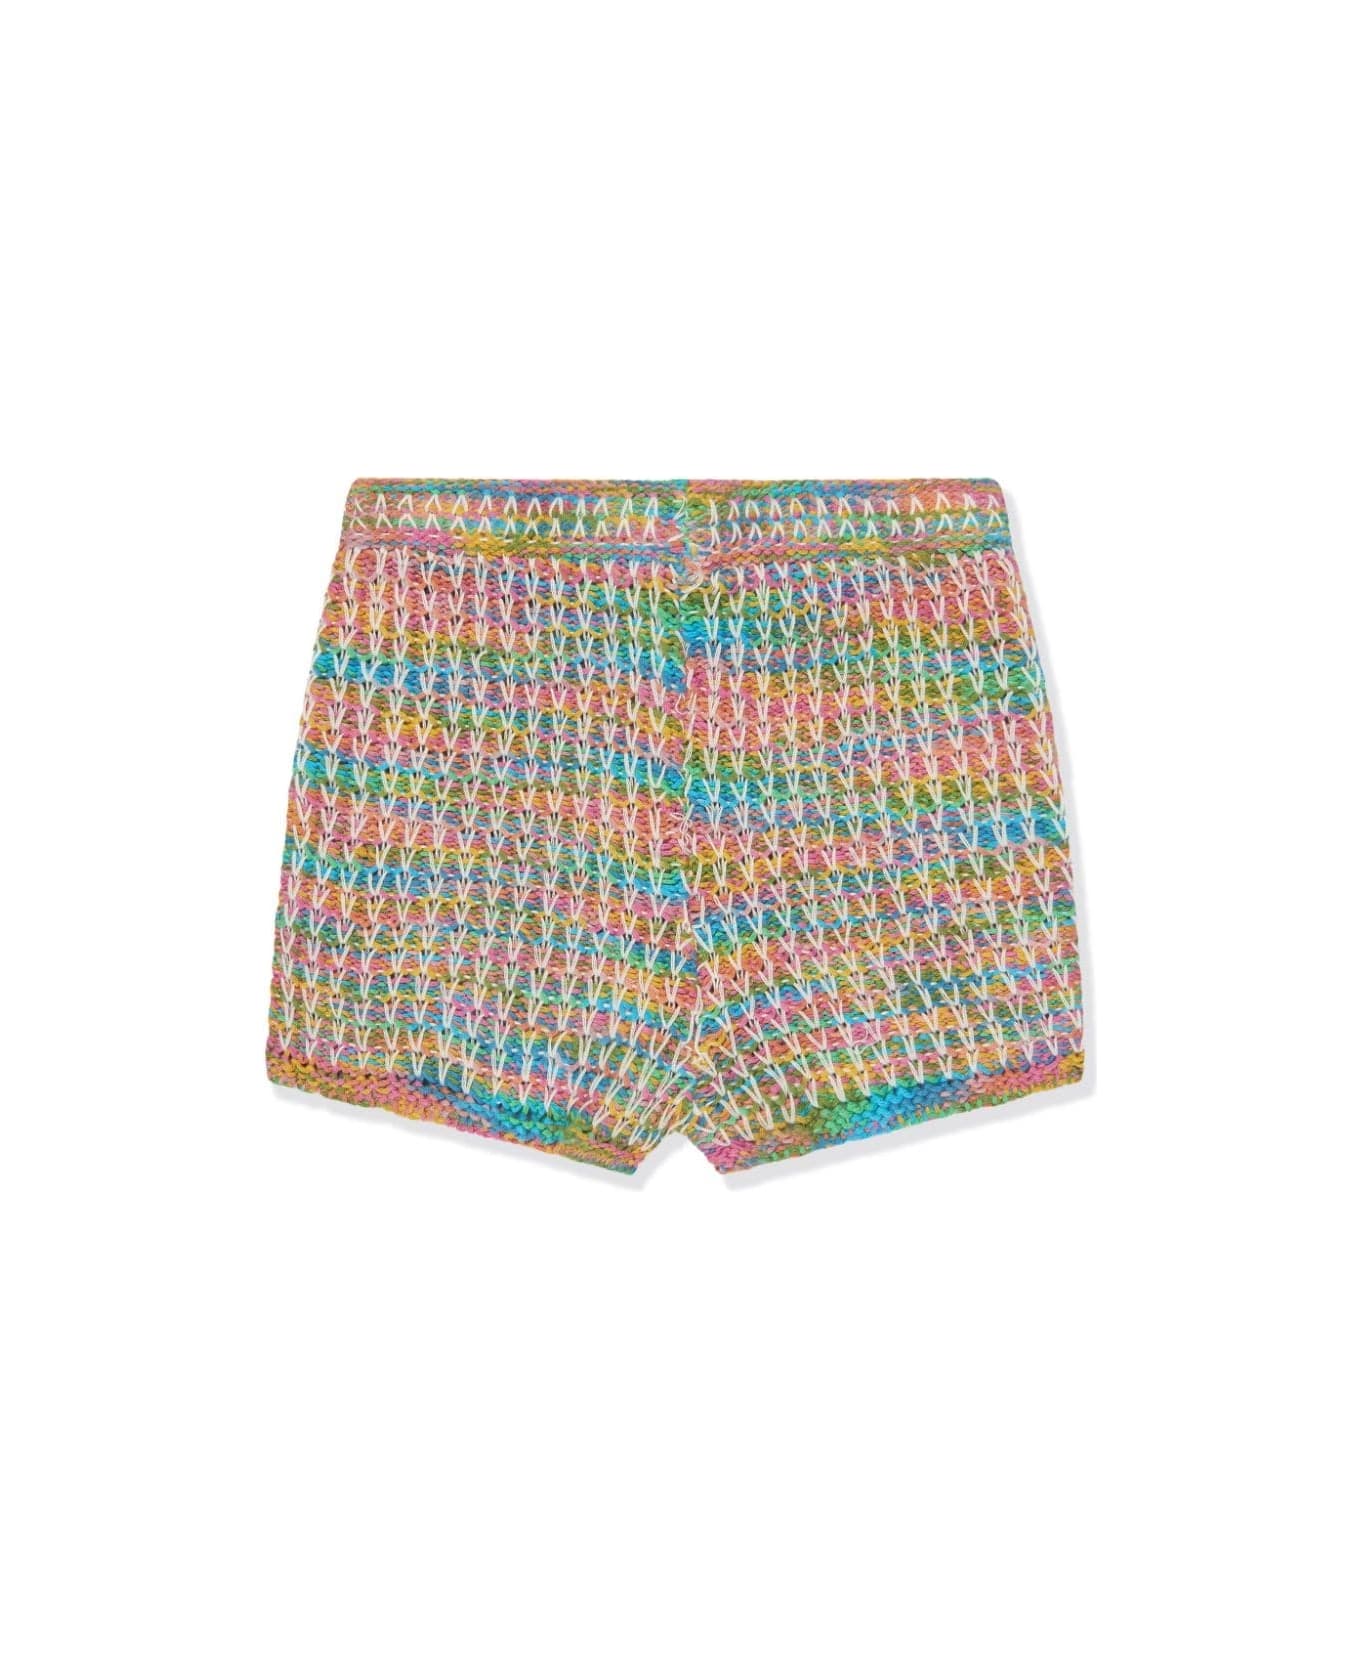 Zimmermann Shorts All'uncinetto August - Multicolor